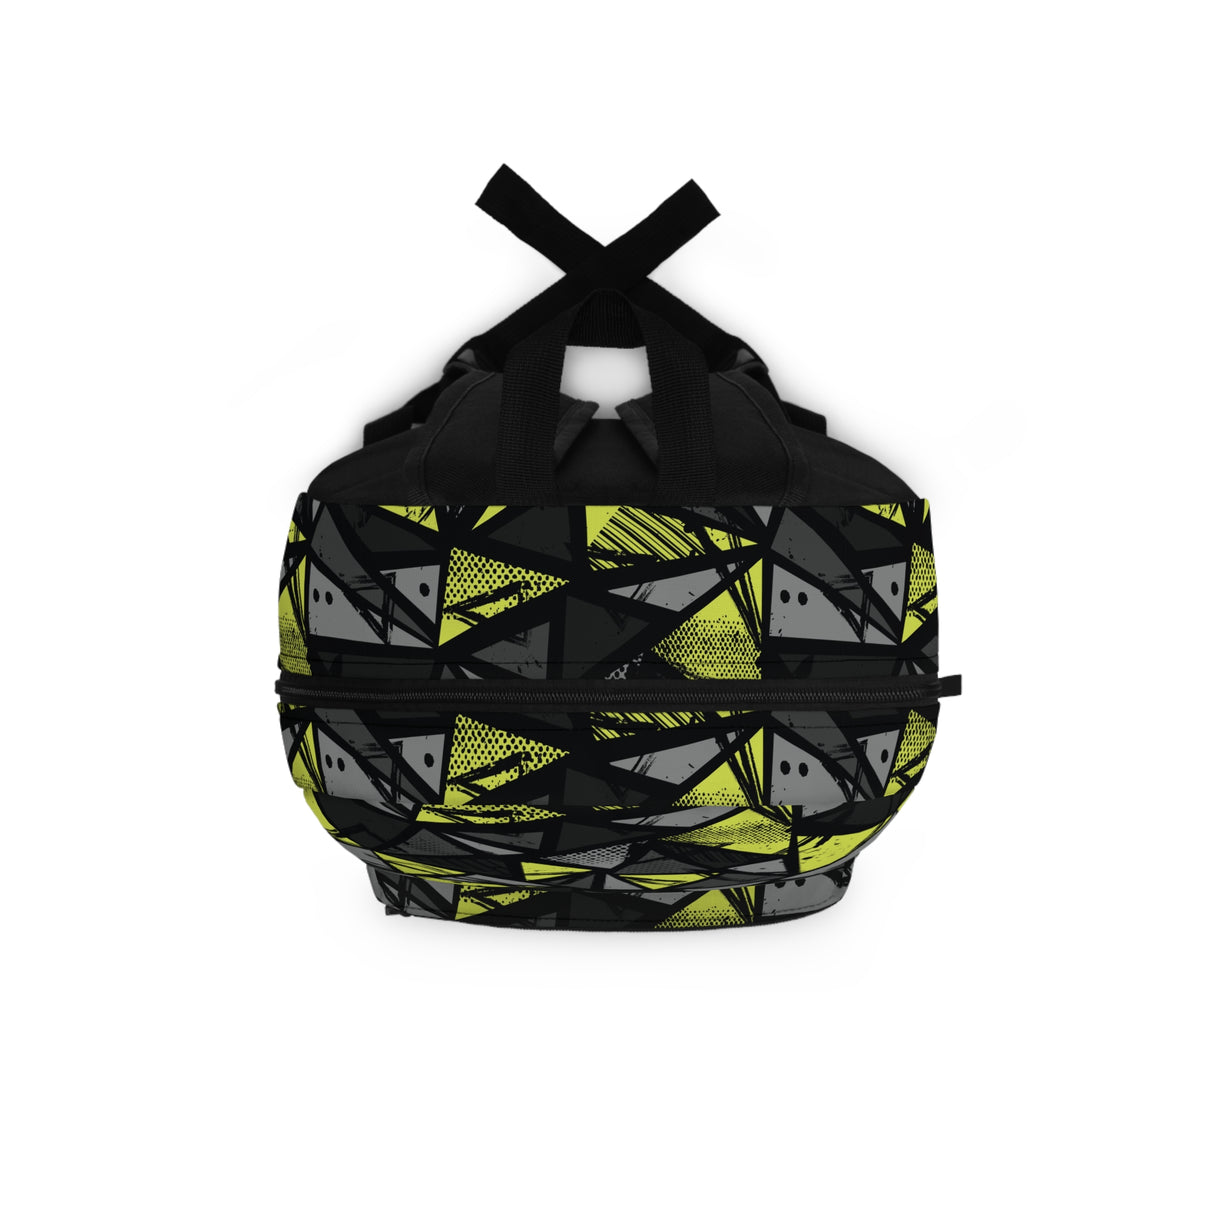 Kids Abstract Black Yellow Backpack